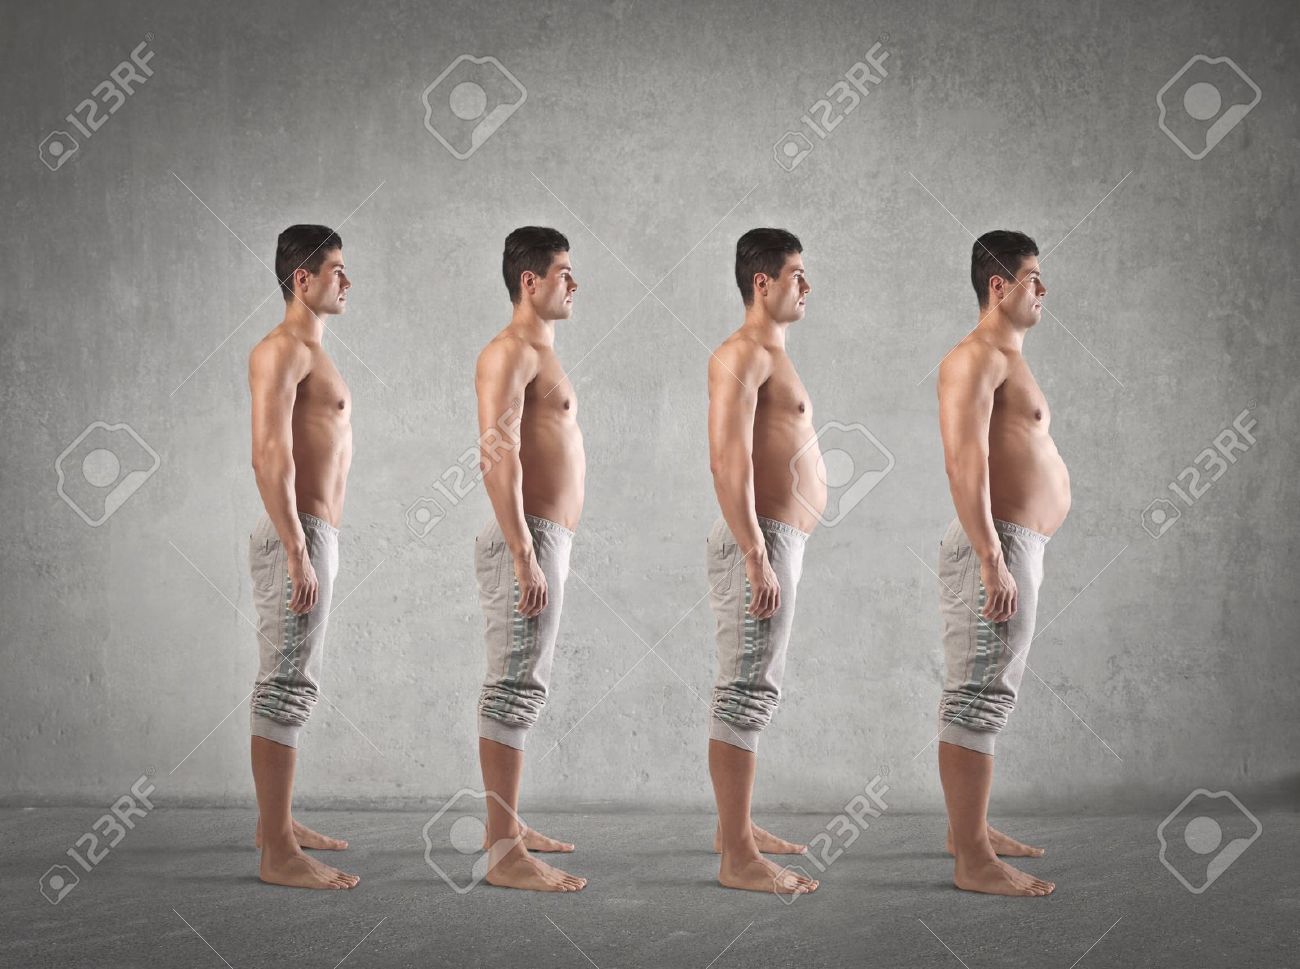 17238712-evolution-nice-skinny-guy-with-a-fat-belly-Stock-Photo-man.jpg